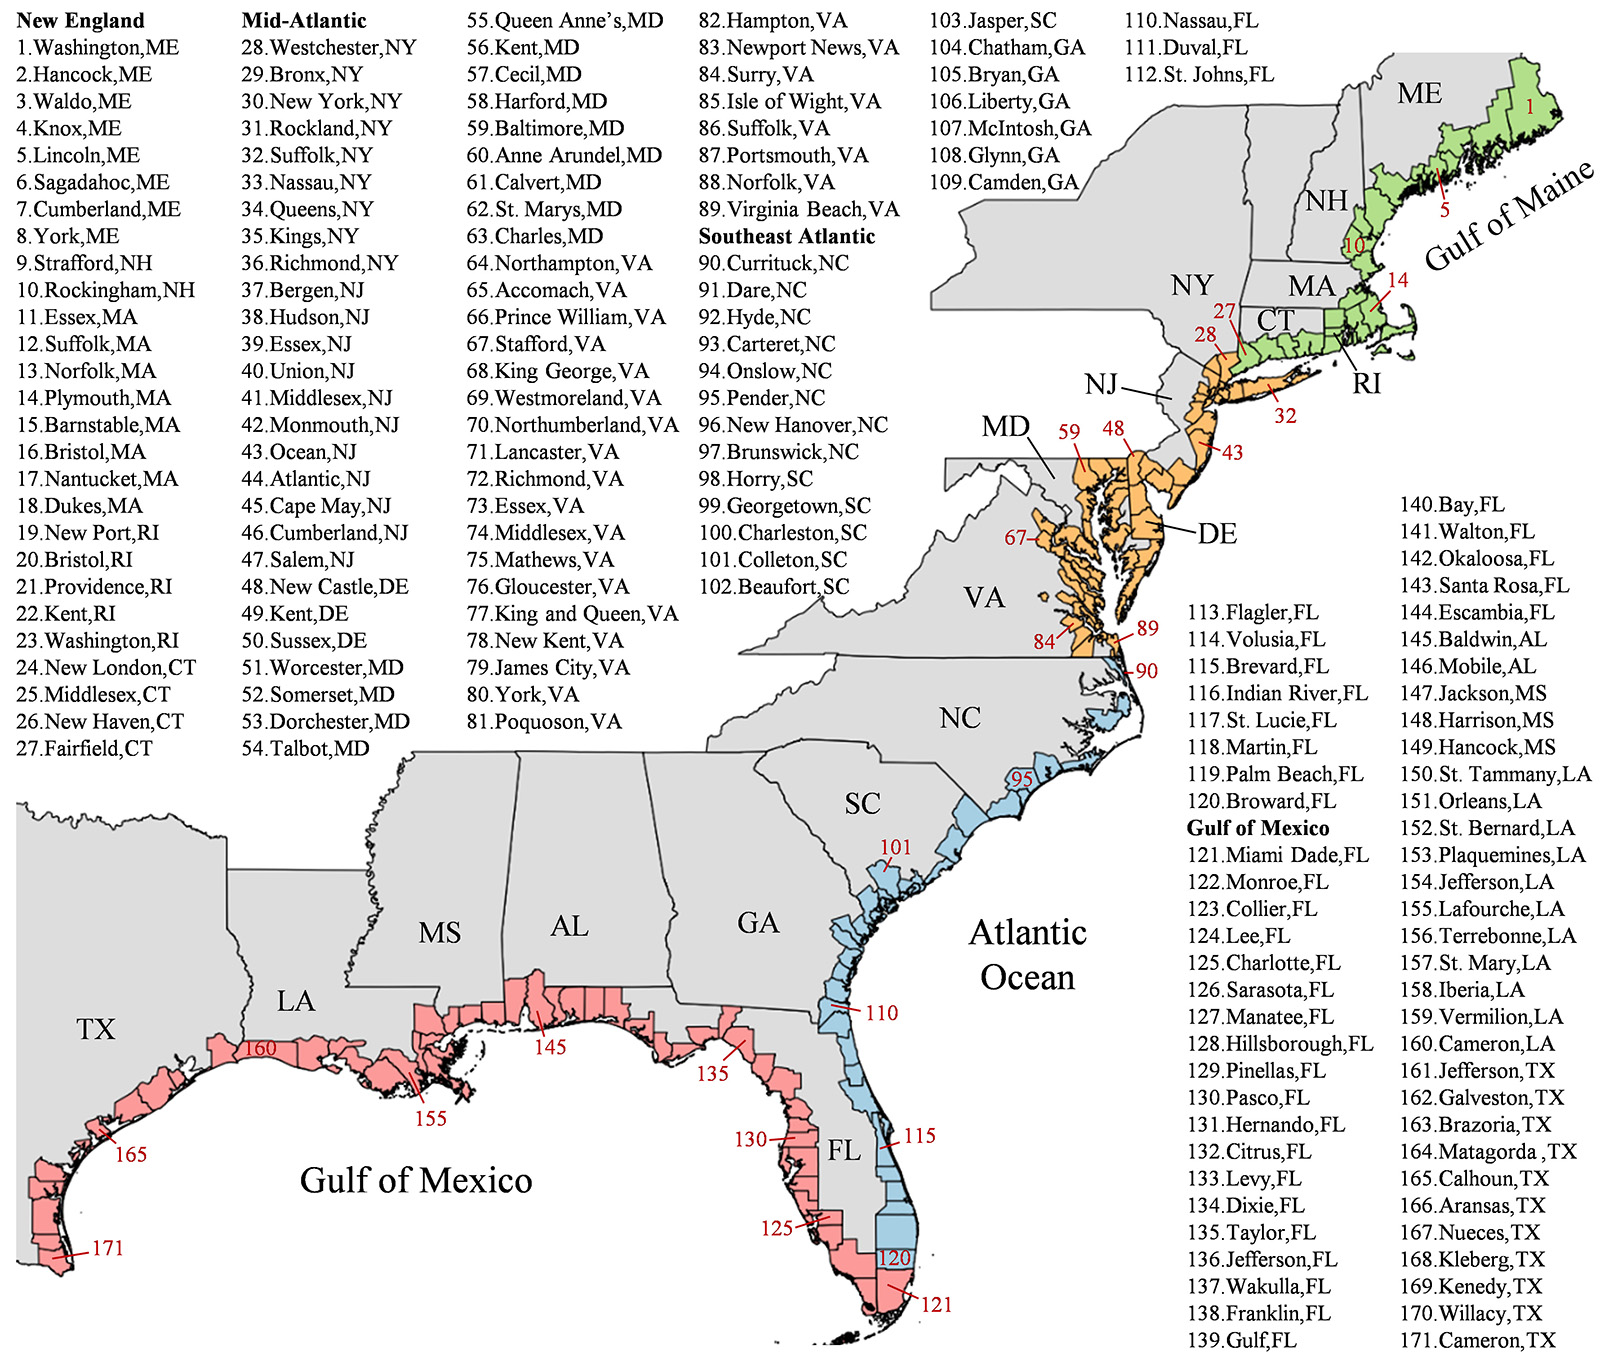 Map of U.S. East and Gulf coasts with numbered listing of 171 coastal counties. (Images courtesy of the researchers)